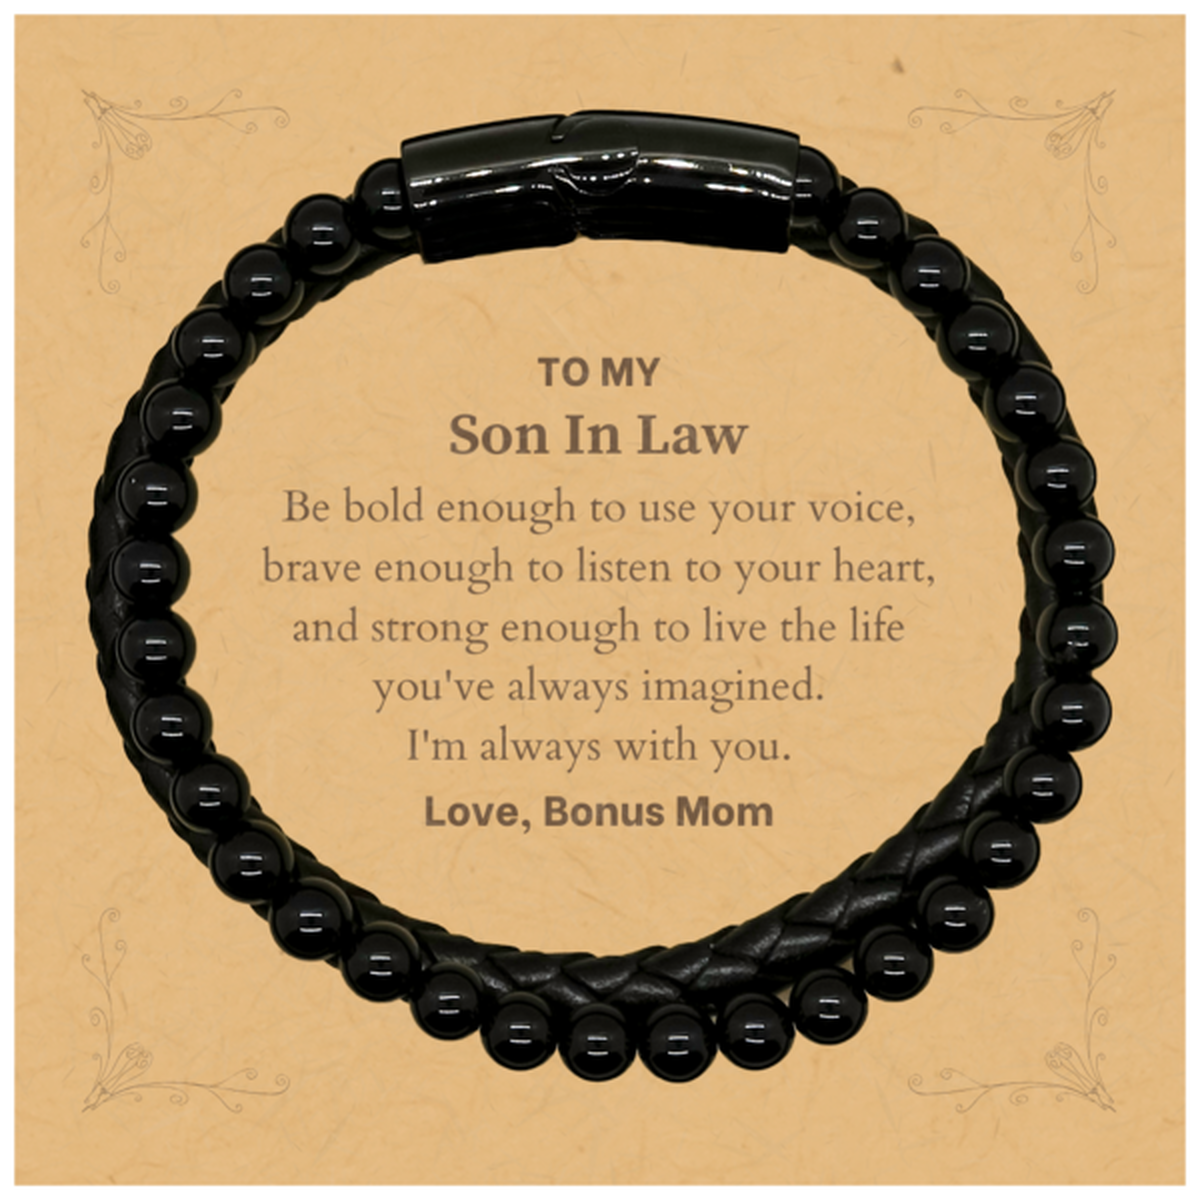 Keepsake Son In Law Stone Leather Bracelets Gift Idea Graduation Christmas Birthday Son In Law from Bonus Mom, Son In Law Be bold enough to use your voice, brave enough to listen to your heart. Love, Bonus Mom